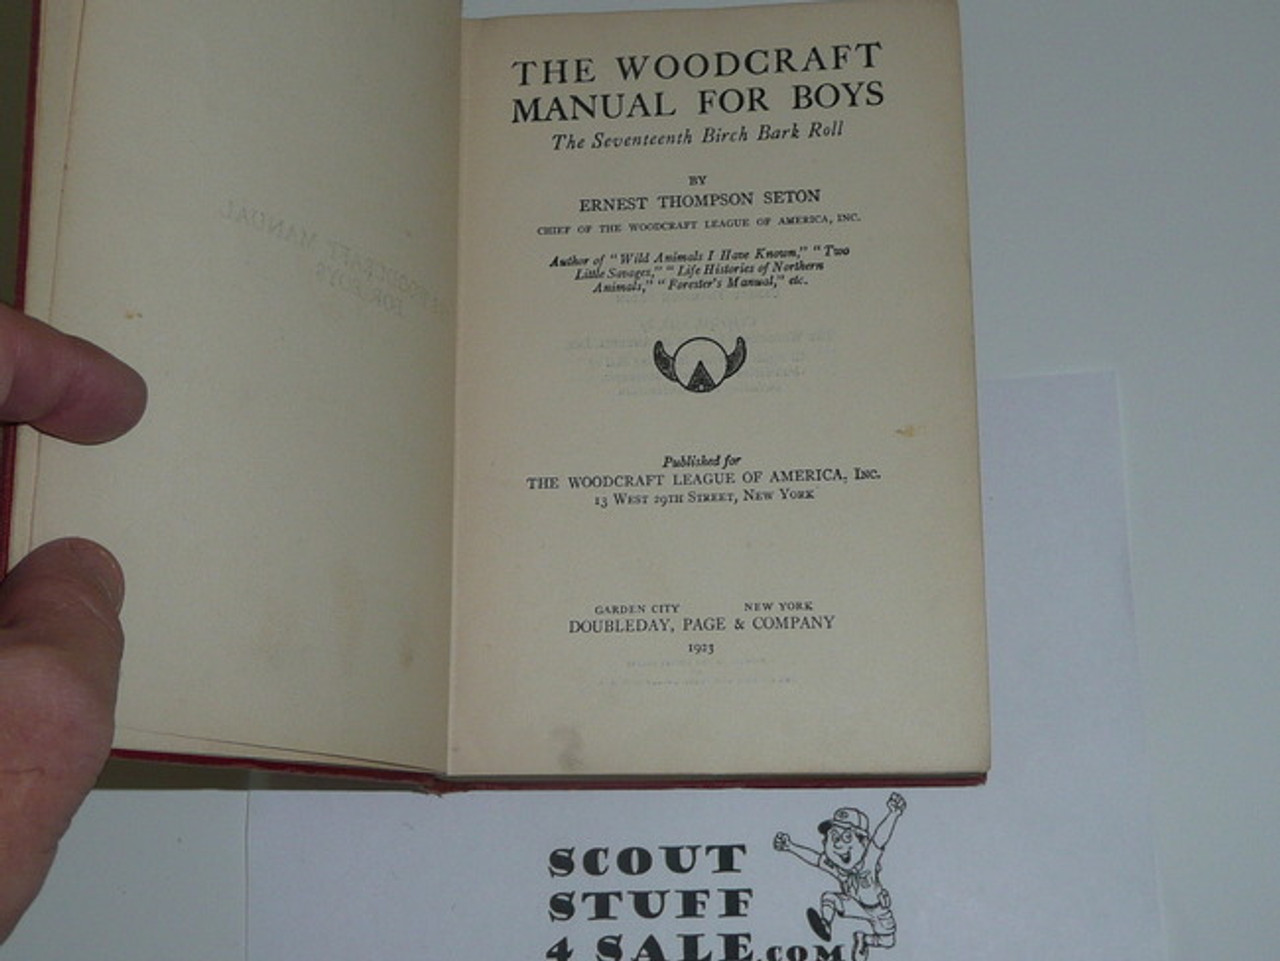 1920 The Woodcraft Manual for Boys of the Woodcraft League, Signed By Seton, Very Good Condition, By Ernest Thompson Seton